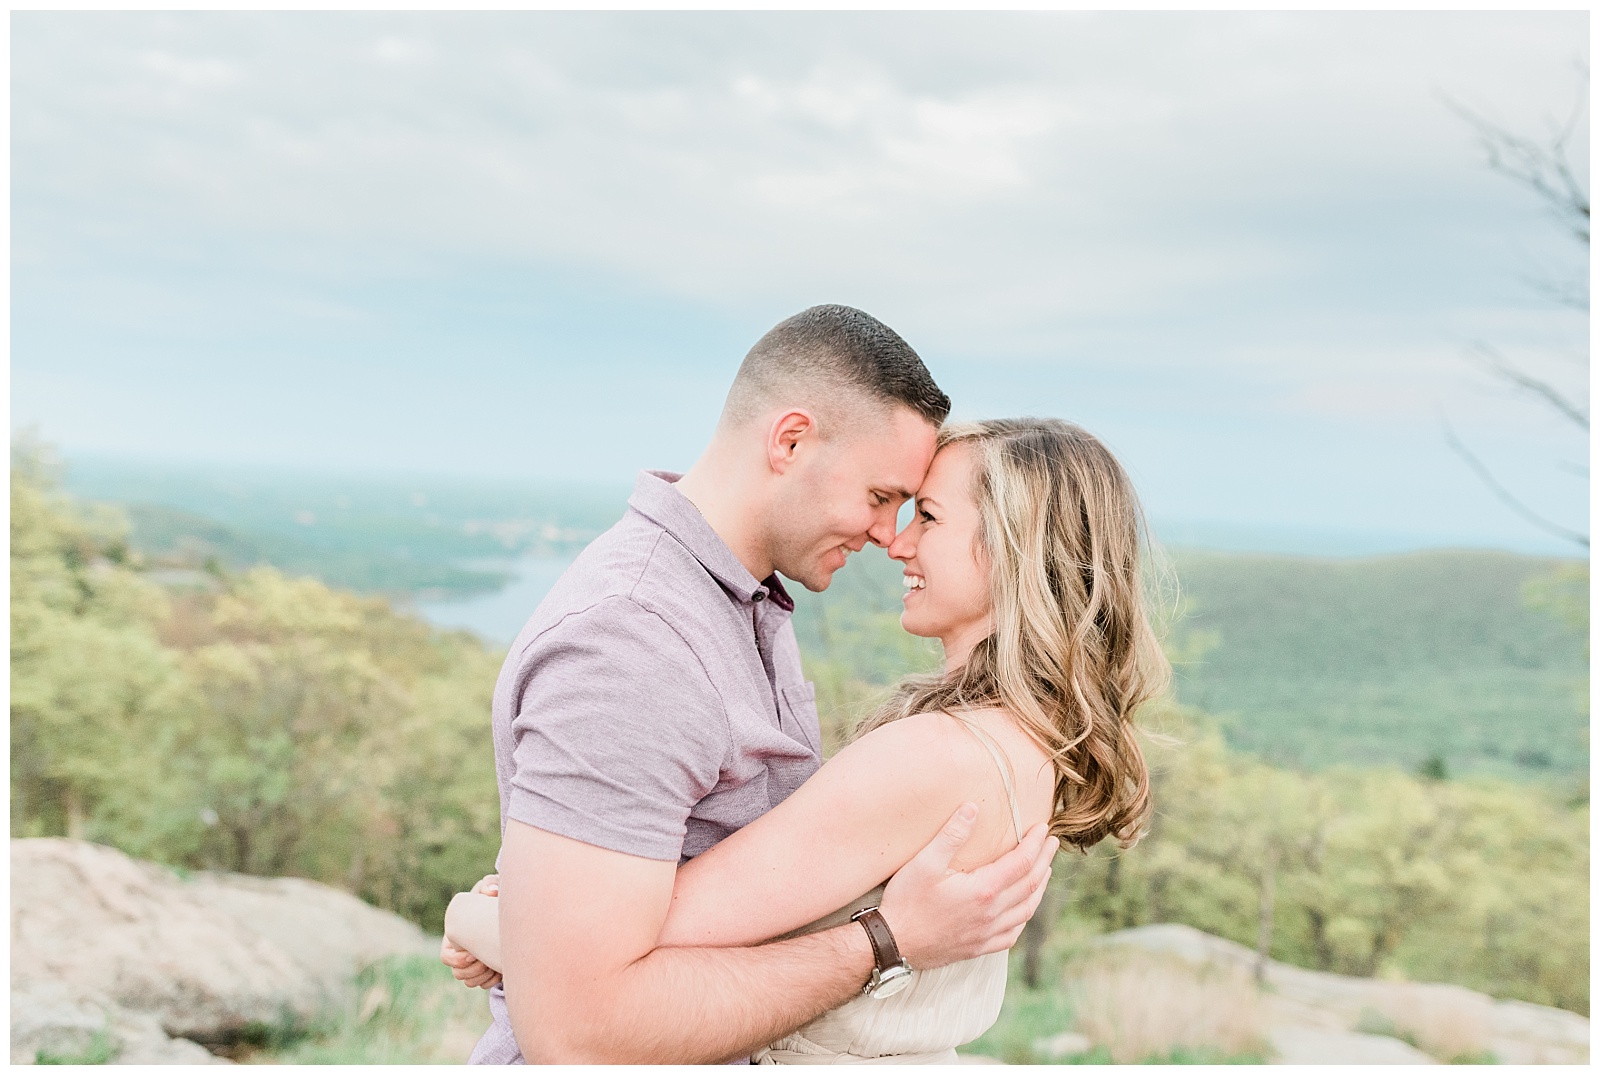 A couple holds each other and rests their foreheads together on a mountaintop.